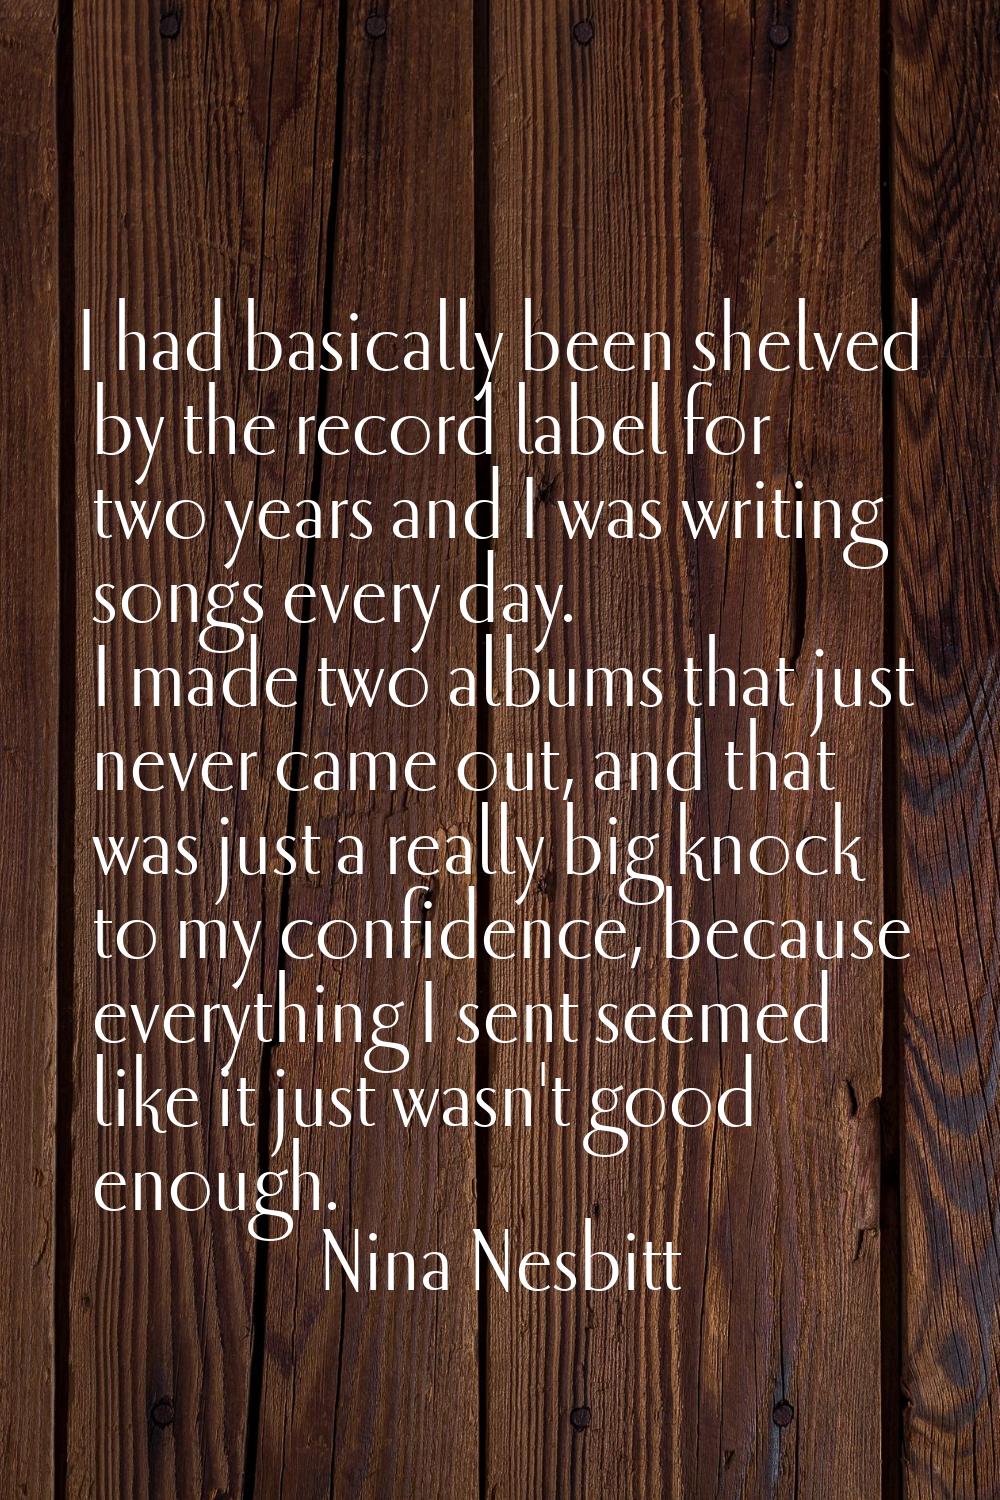 I had basically been shelved by the record label for two years and I was writing songs every day. I